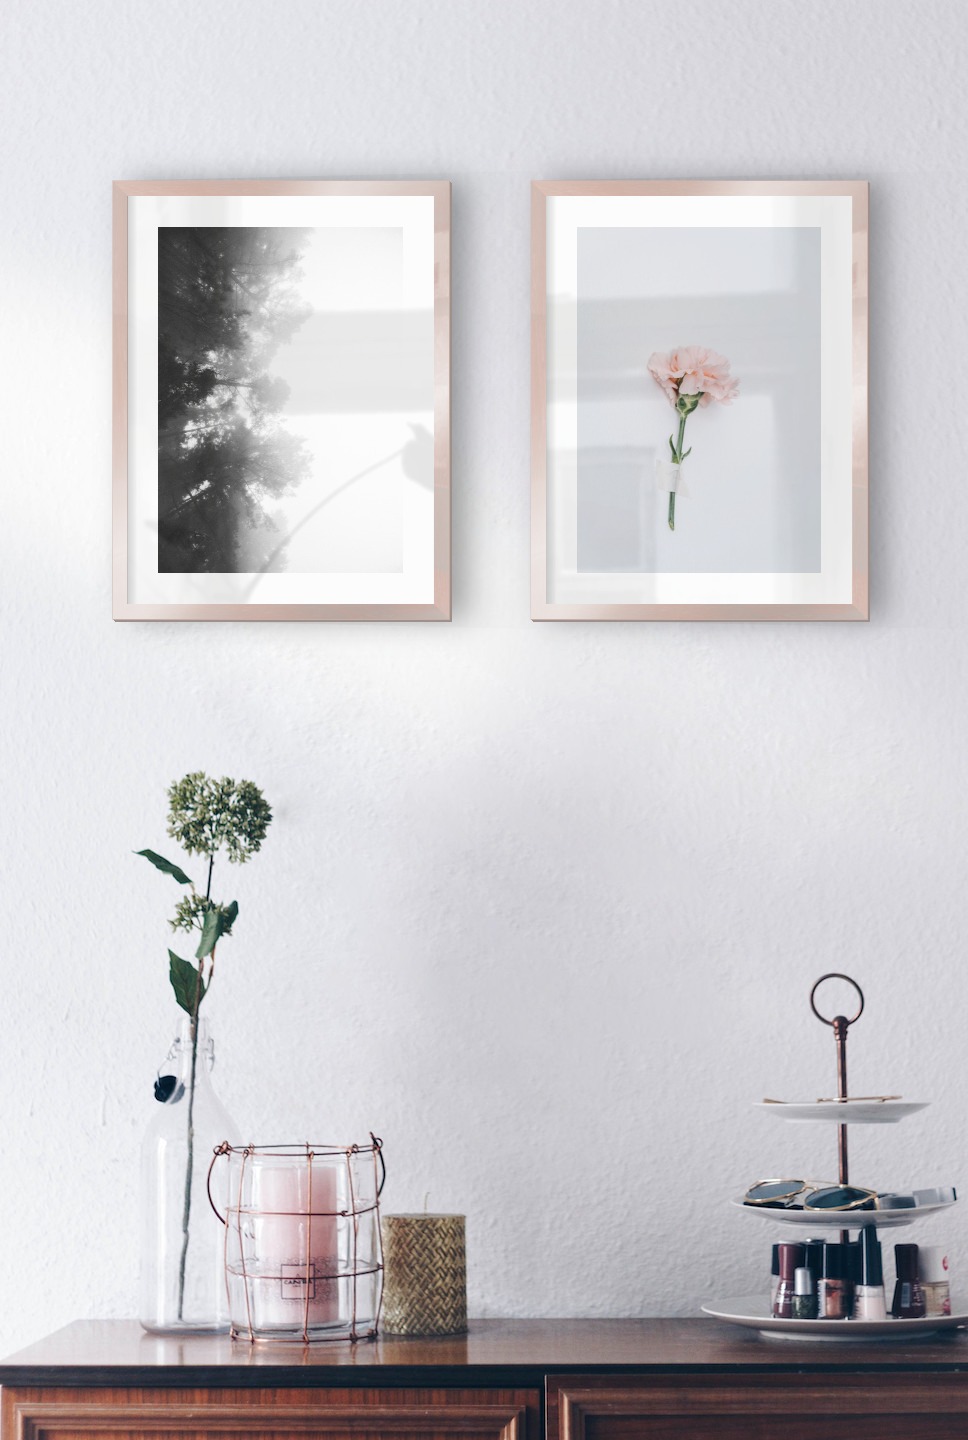 Gallery wall with picture frames in copper in sizes 30x40 with prints "Foggy wooden tops from the side" and "Pink flower"